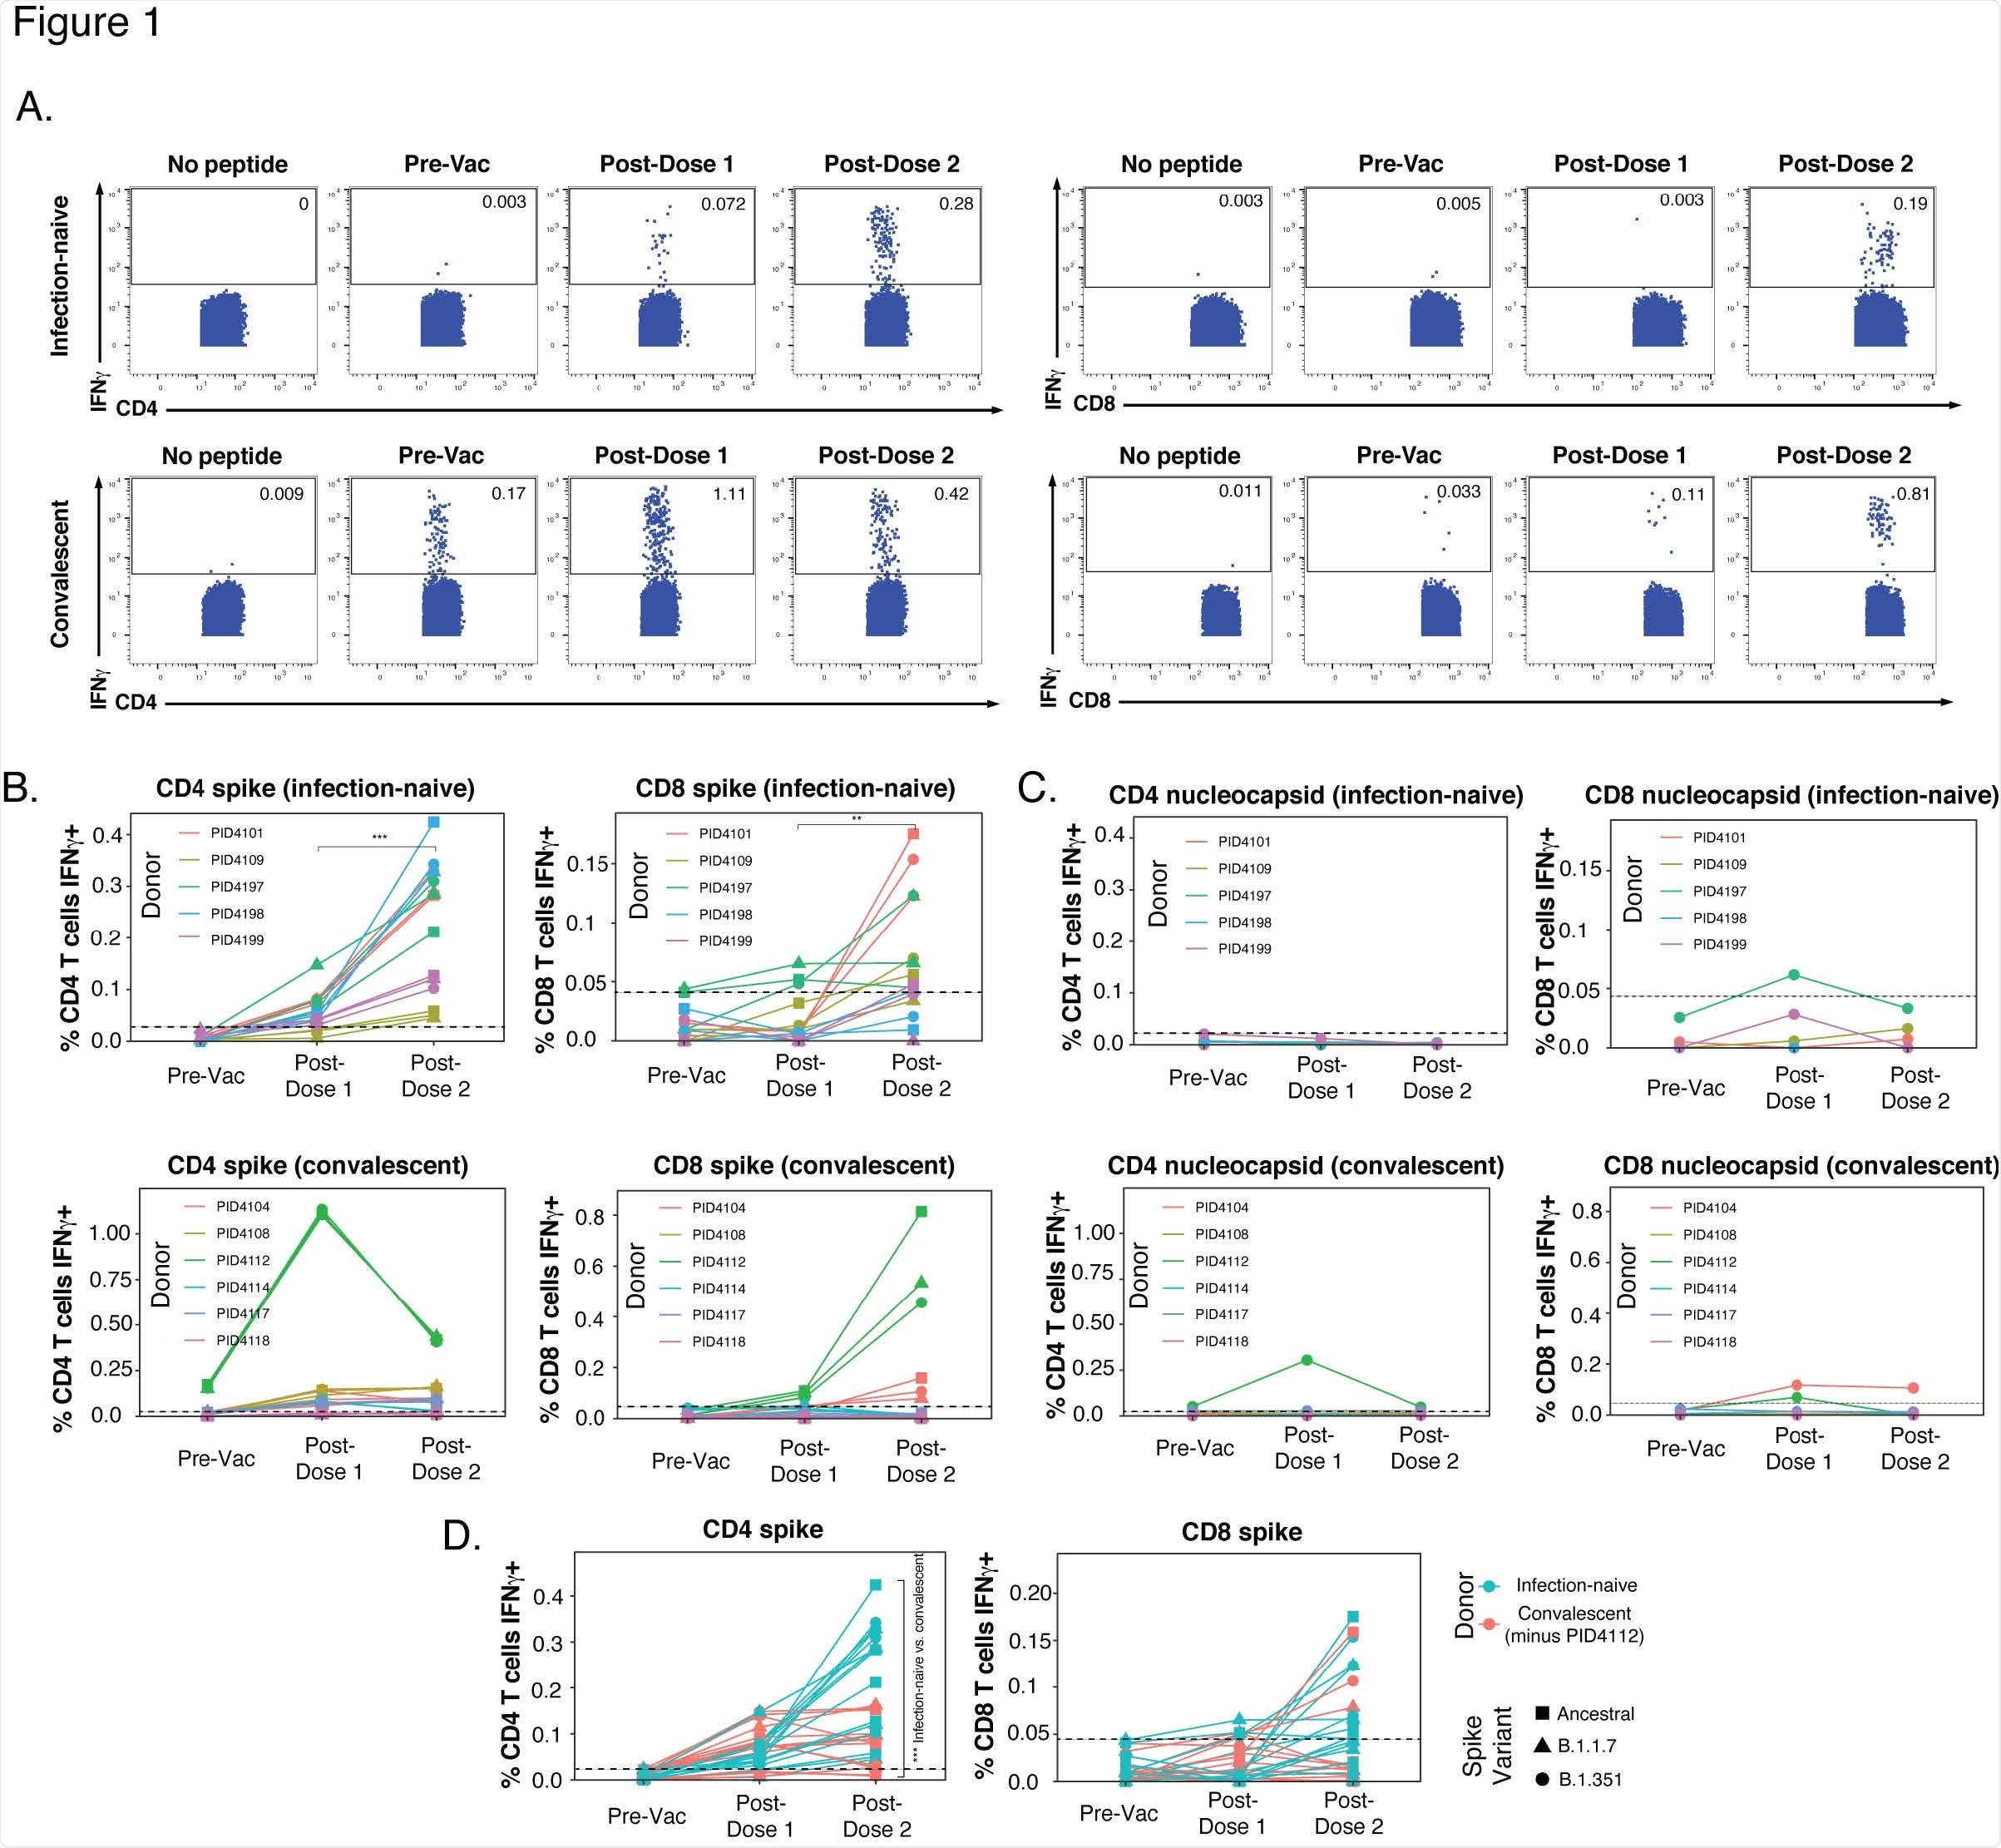 Six-hour stimulation with spike peptides does not induce significant expression of IL4, IL17, or activation markers in SARS-CoV-2-specific T cells. (A, B) CD4+ T cells were assessed for expression of the Th2 cytokine IL4 (A) or the Th17 cytokine IL17 (B) following 6 hours of stimulation with ancestral spike peptides using PBMC specimens from a representative infection-naïve individual (PID4197) before vaccination (Pre- Vac), or two weeks after dose 1 or dose 2 of vaccination. (C) CD4+ T cells were assessed for co-expression of the activation-induced markers (AIM) Ox40 and 4-1BB following 6 hours of stimulation, using the same specimens as panel A. (D) CD8+ T cells were assessed for co831 expression of the AIM CD69 and 4-1BB following 6 hours of stimulation, using the same specimens as panel A. Baseline specimens not treated with peptide are shown as a comparison control. Numbers correspond to percentages of cells within the gates. Note that the activated (AIM+) cells that appear in stimulated specimens probably do not reflect peptide-specific stimulation as AIM+ cells are also detected in the baseline specimens.